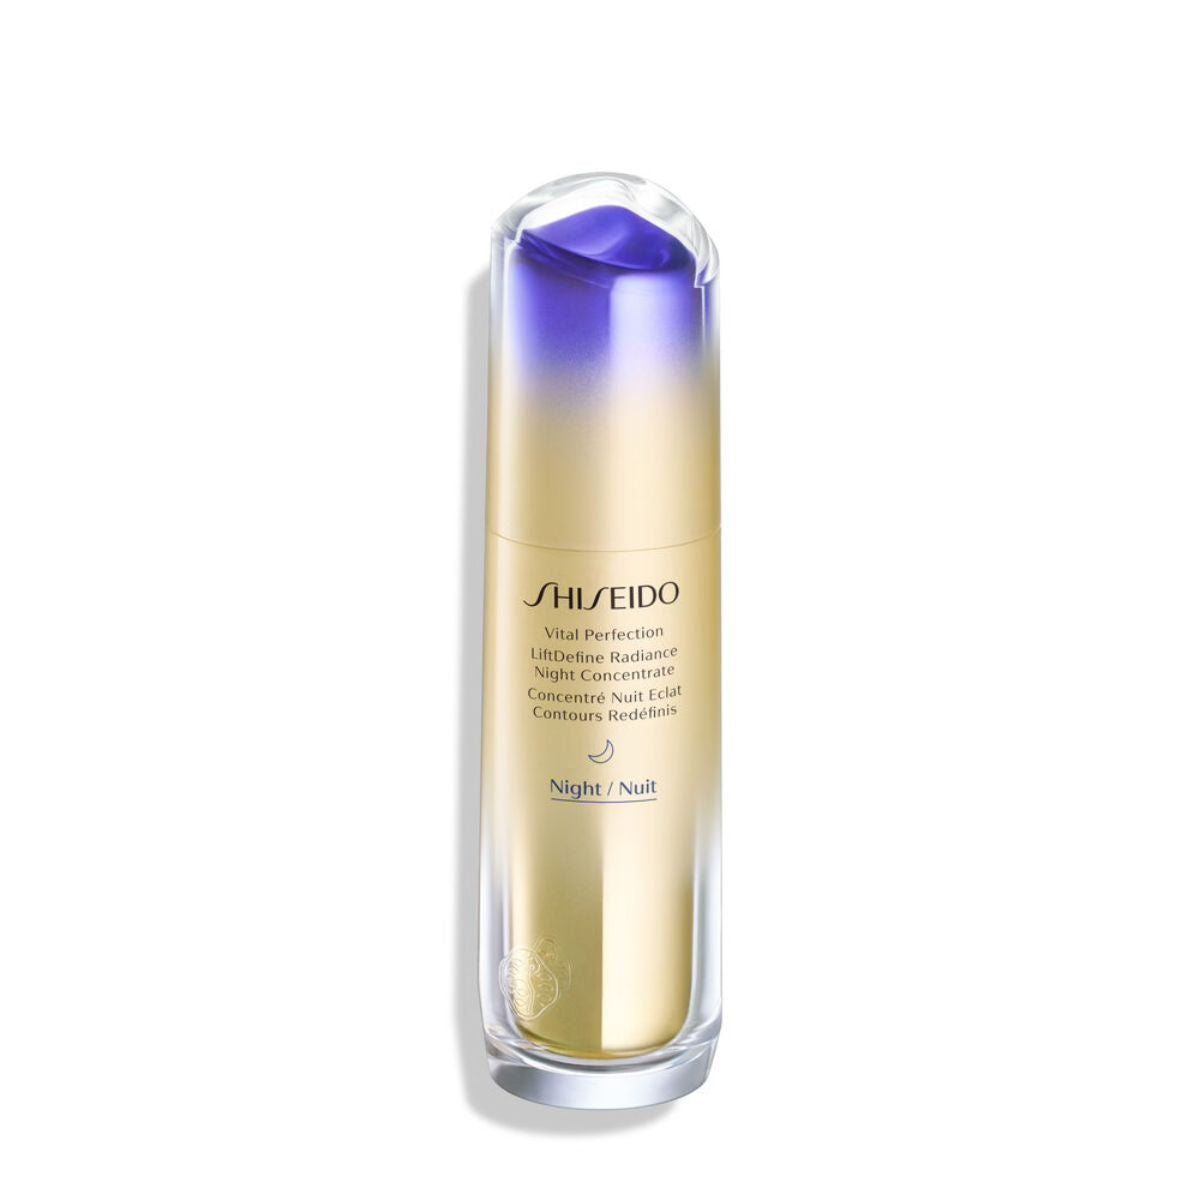 Shiseido Vital Perfection Night Lift Define Radiance Night Concentrate